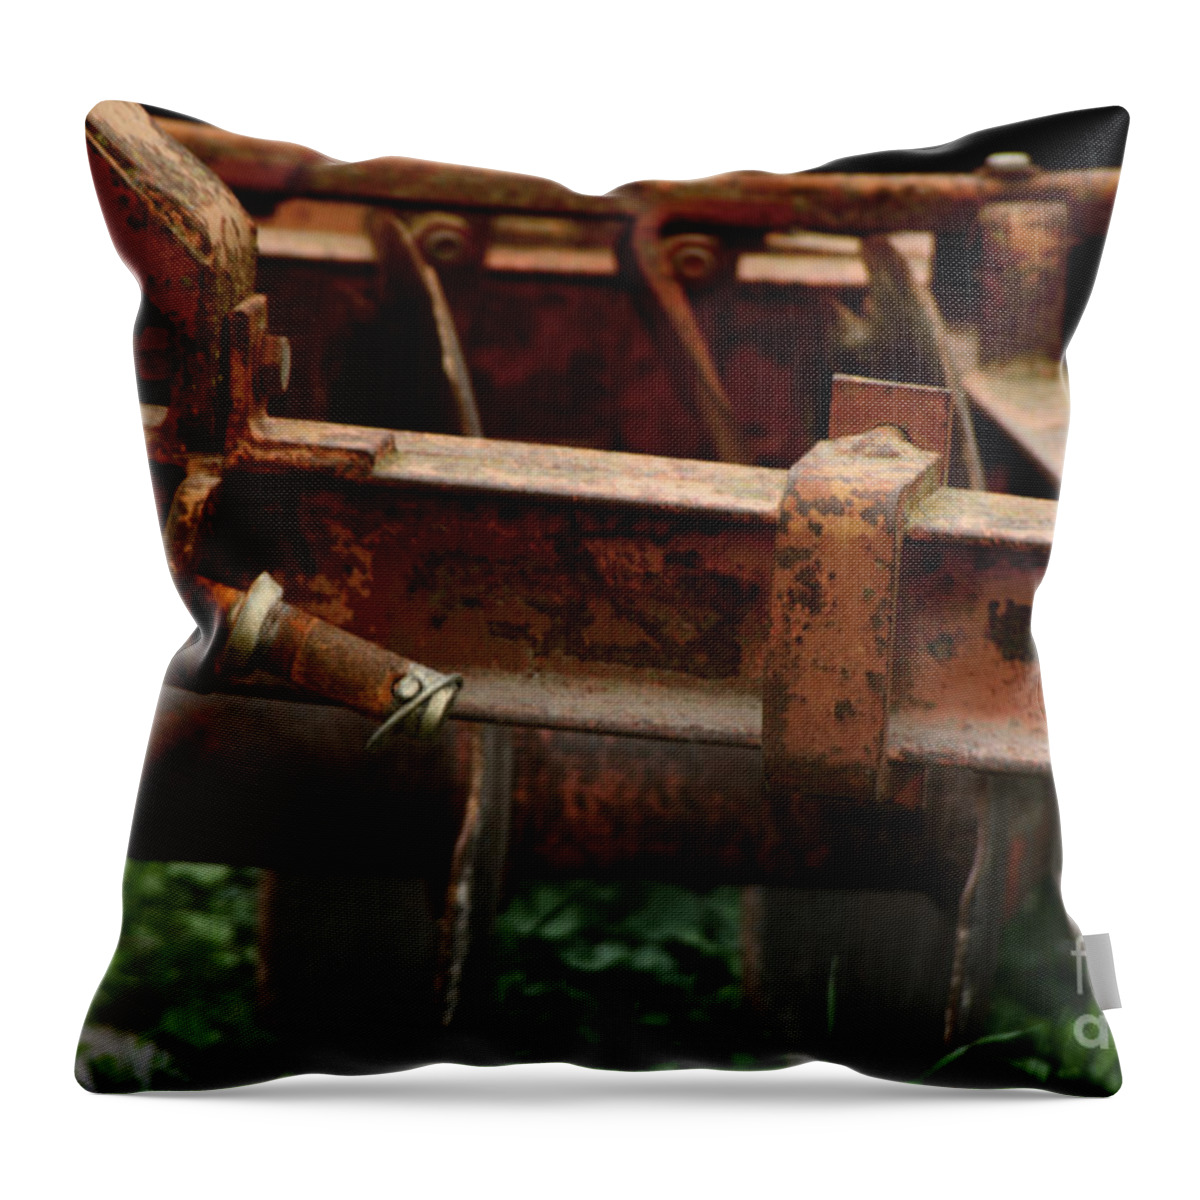 Tractor Throw Pillow featuring the photograph Old Mowing Machine by Doc Braham